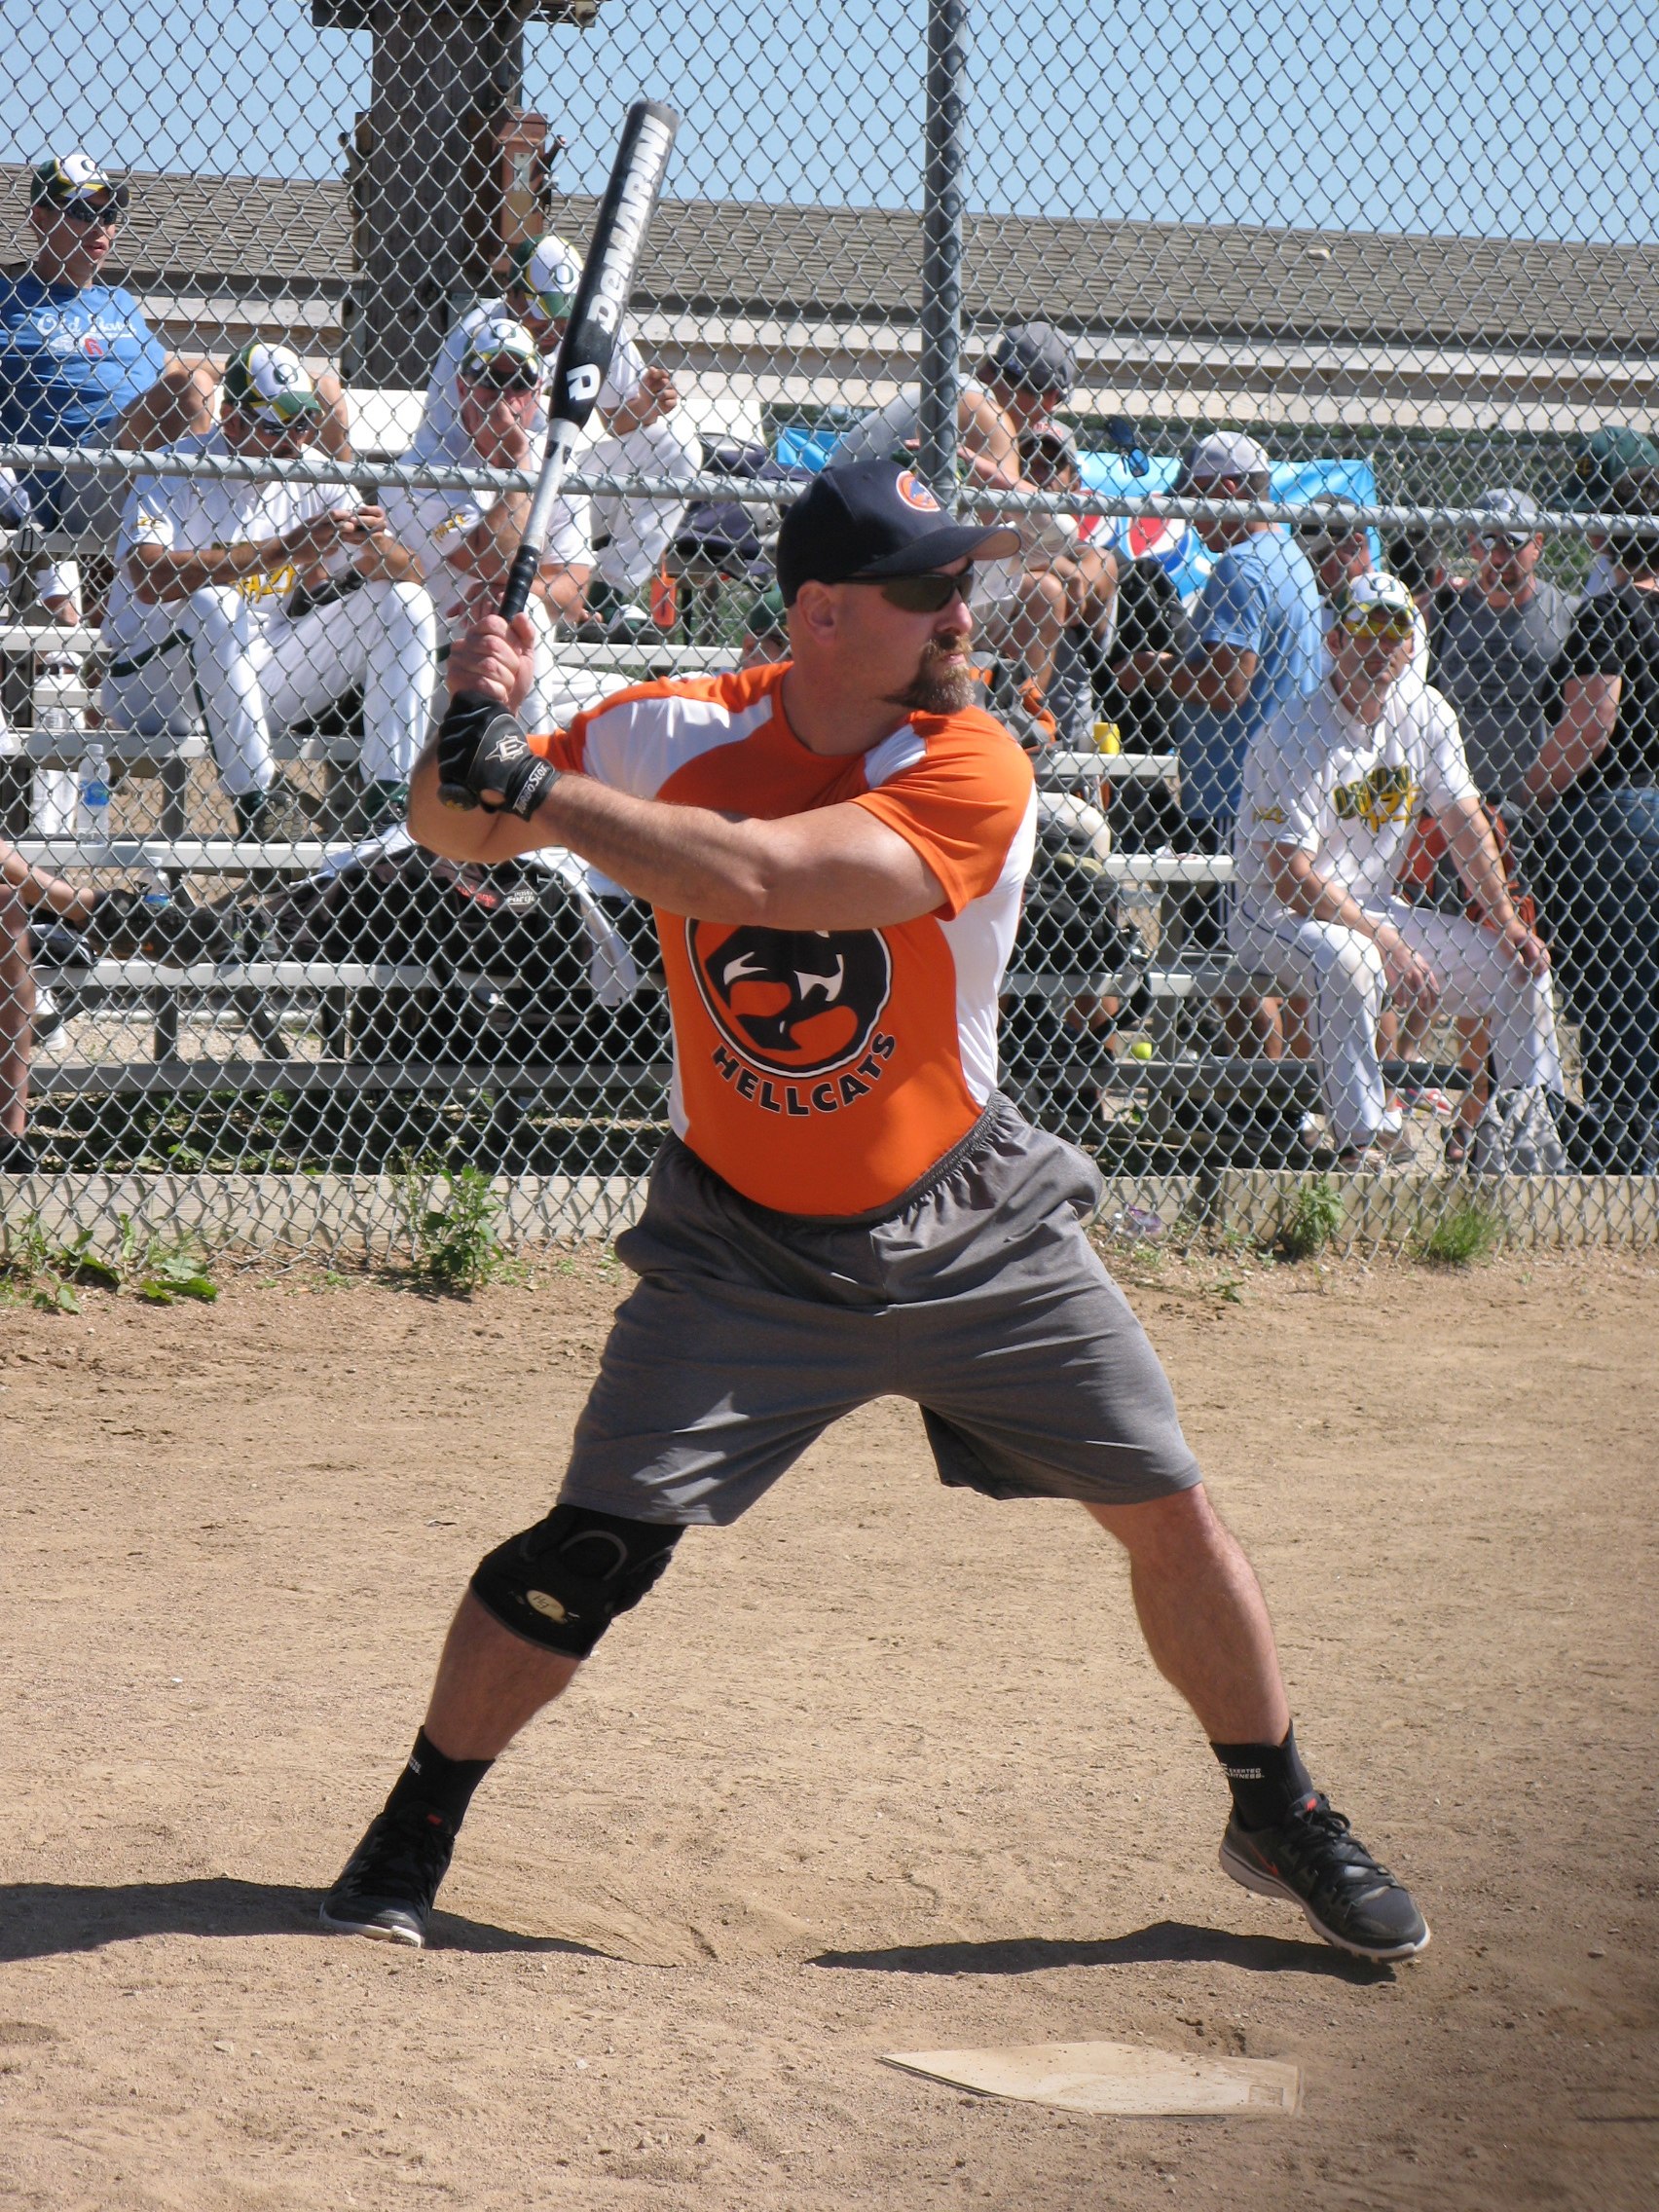 Our clean-up hitter, Dean. He had a great tournament, batting .800+.